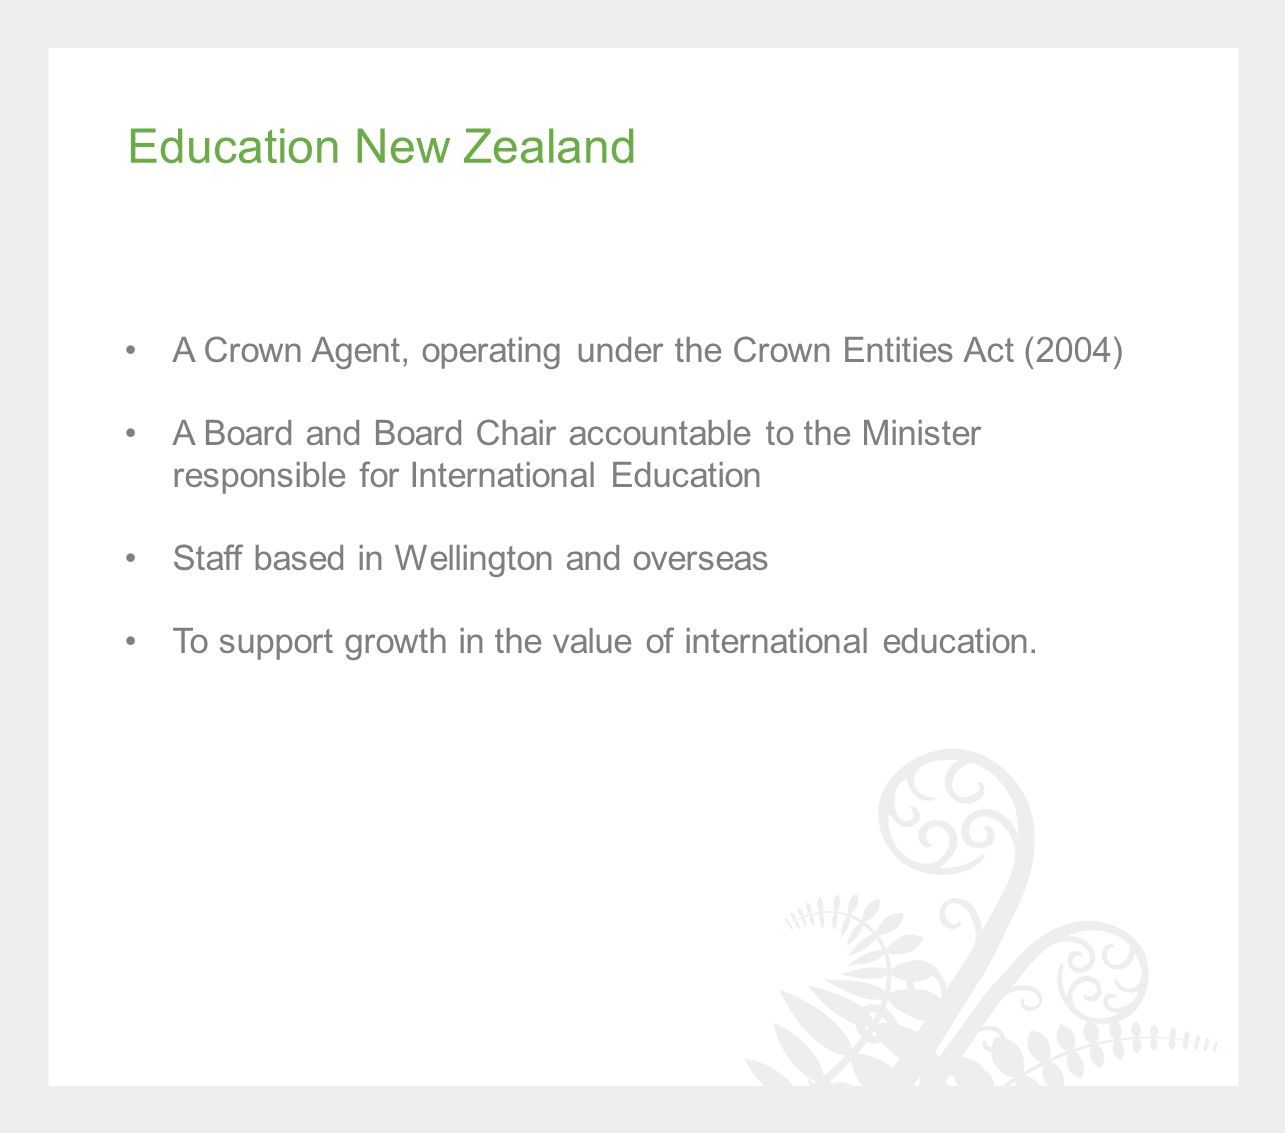 Education New Zealand A Crown Agent, operating under the Crown Entities Act (2004) A Board and Board Chair accountable to the Minister responsible for International Education Staff based in Wellington and overseas To support growth in the value of international education.